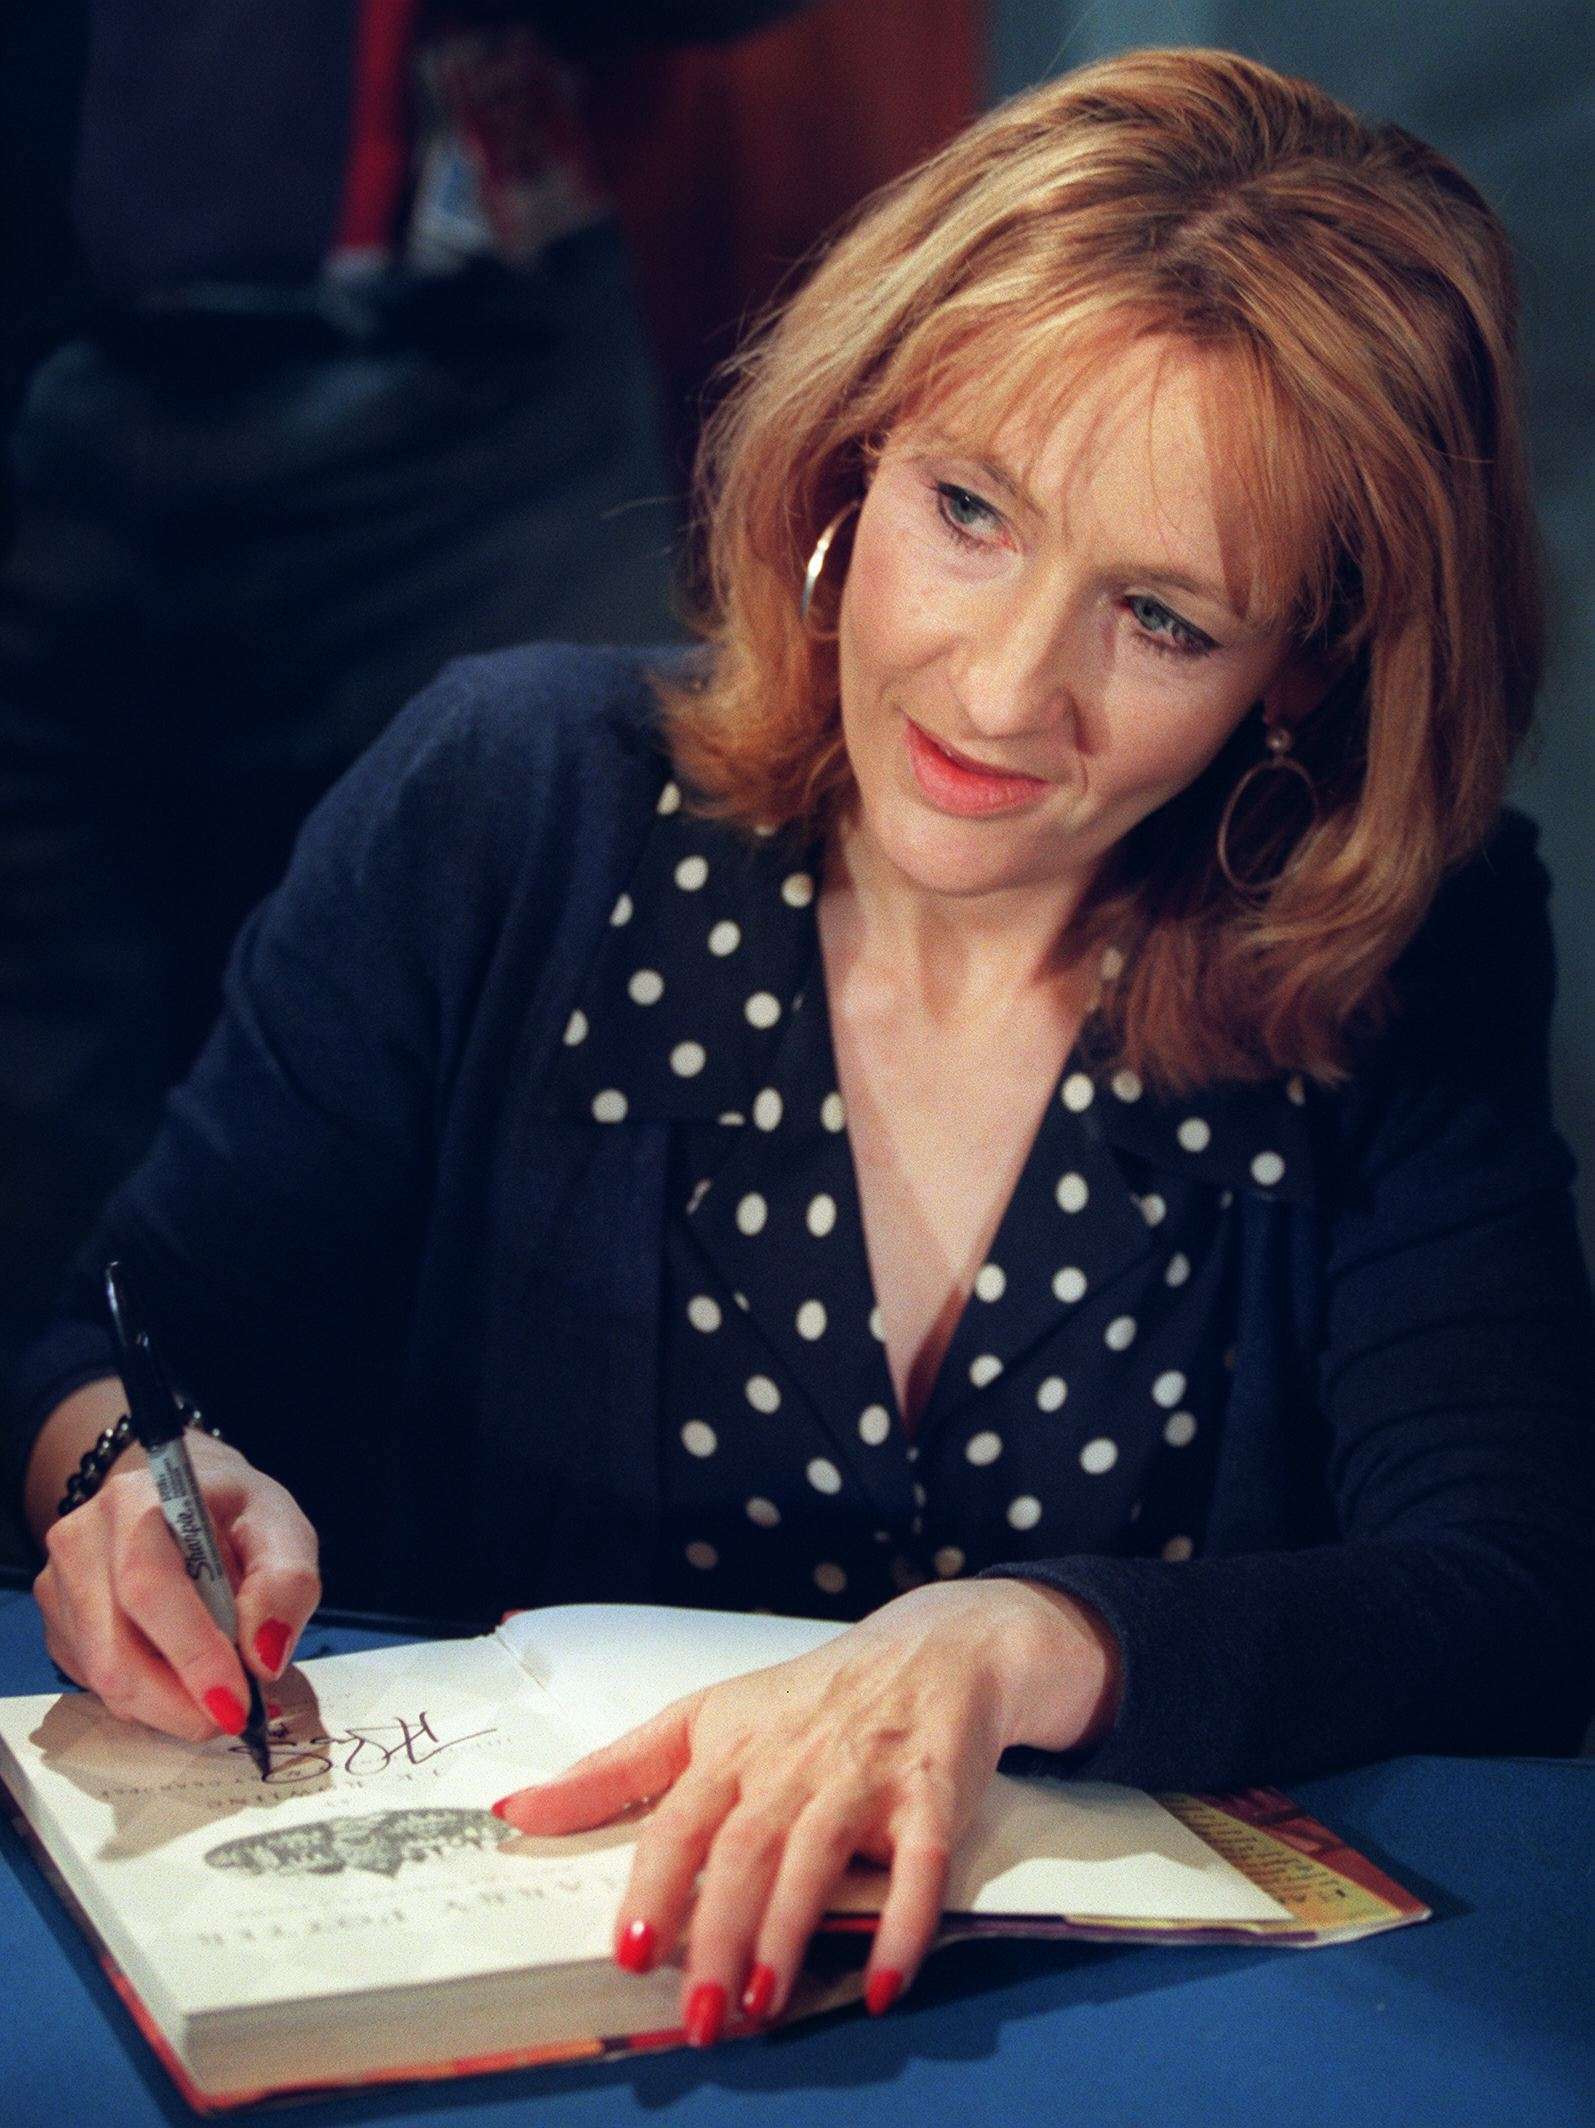 Is J.K. Rowling Writing A New Harry Potter Book? She Says ...